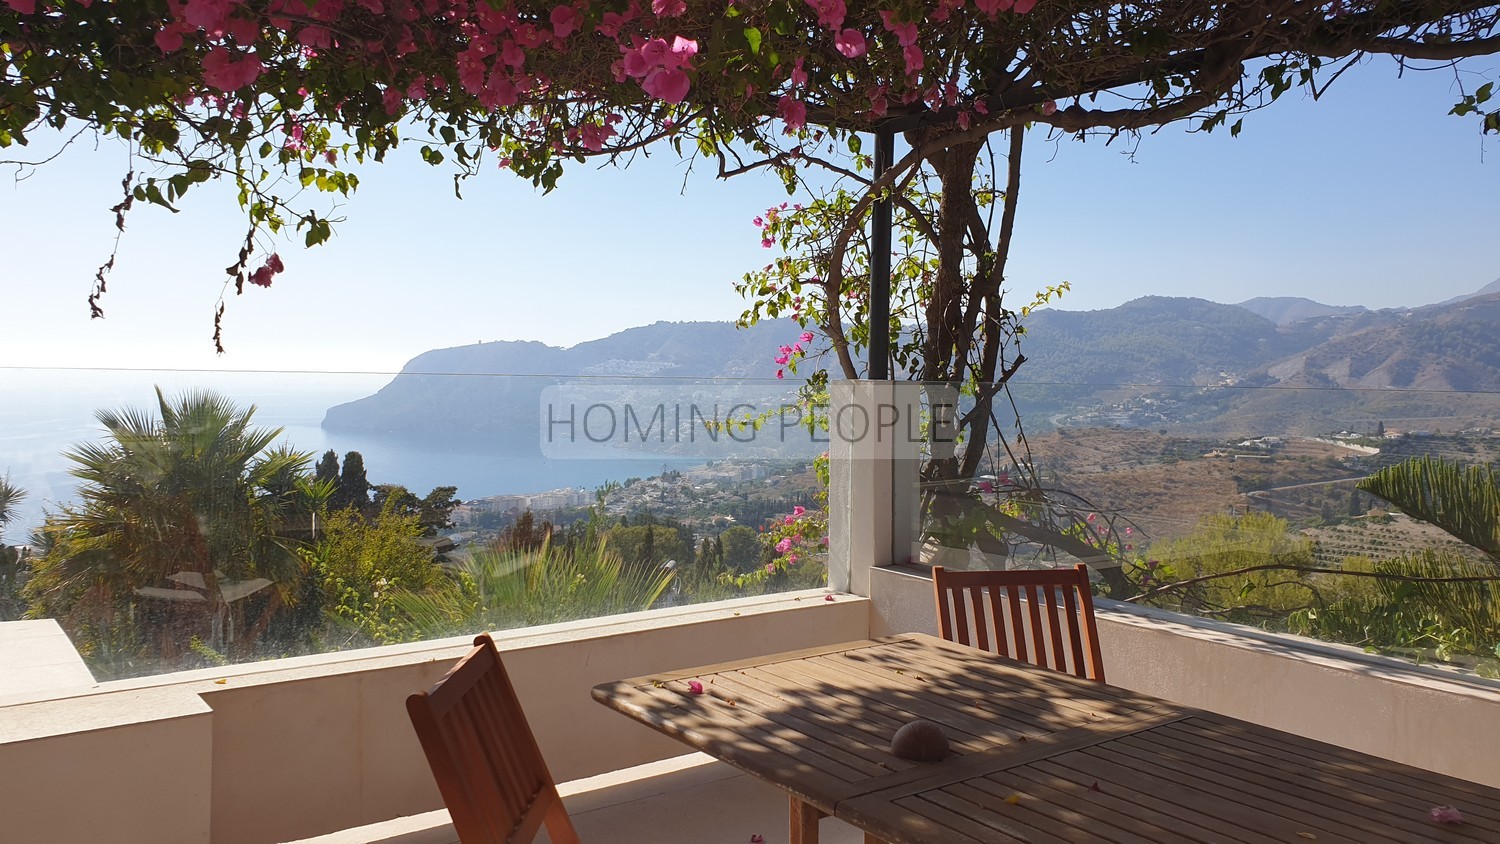 Charming, Andalusian-style villa: Greenery, terraces, swimming pool and wonderful views over the bay !